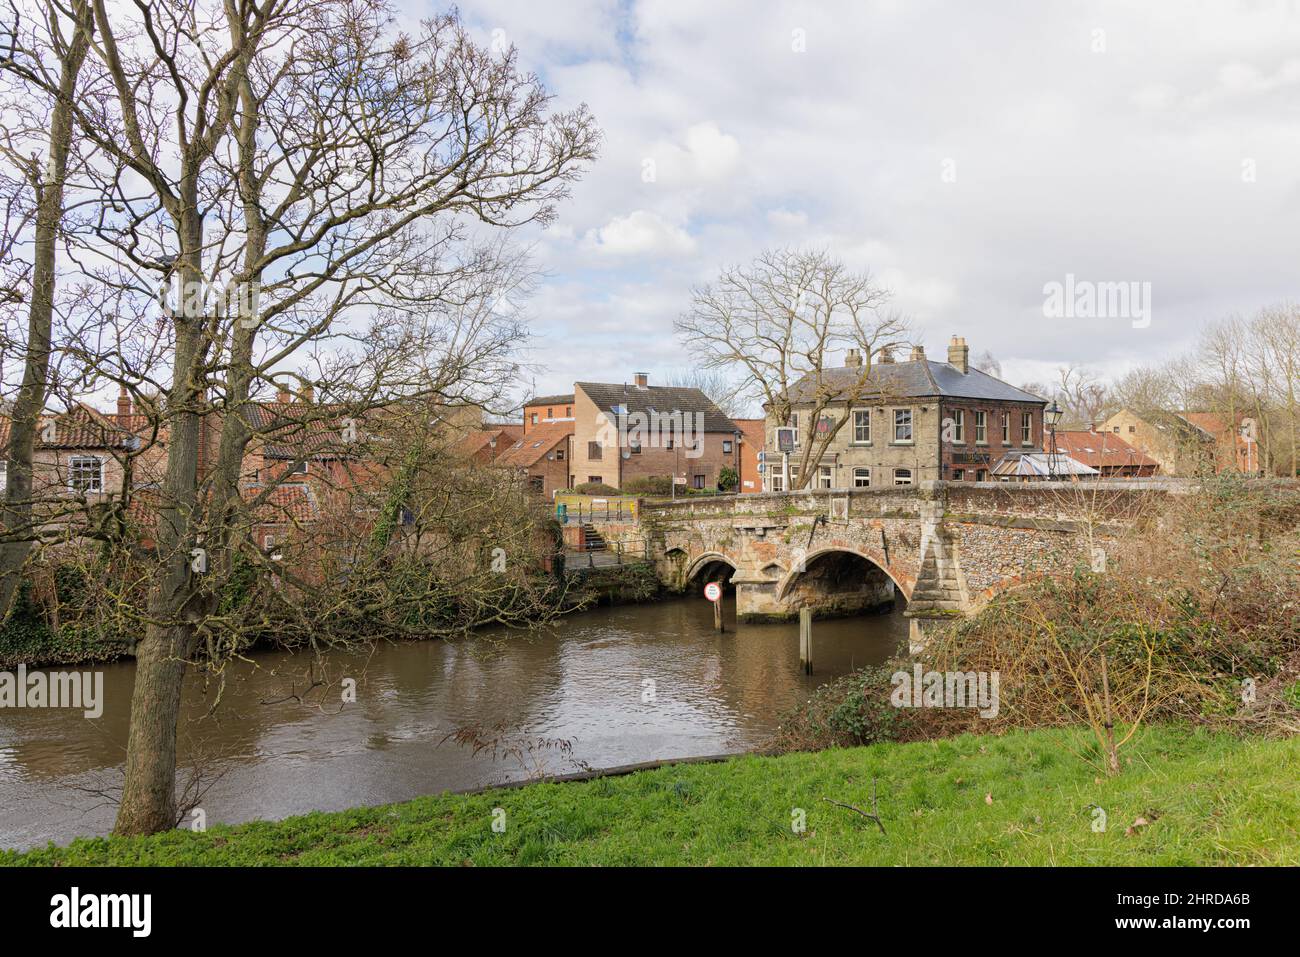 Norwich, Norfolk, UK, February 21st 2022: The medieval Bishop's Bridge, built in 1340, crosses the River Wensum by the Red Lion public house. Stock Photo